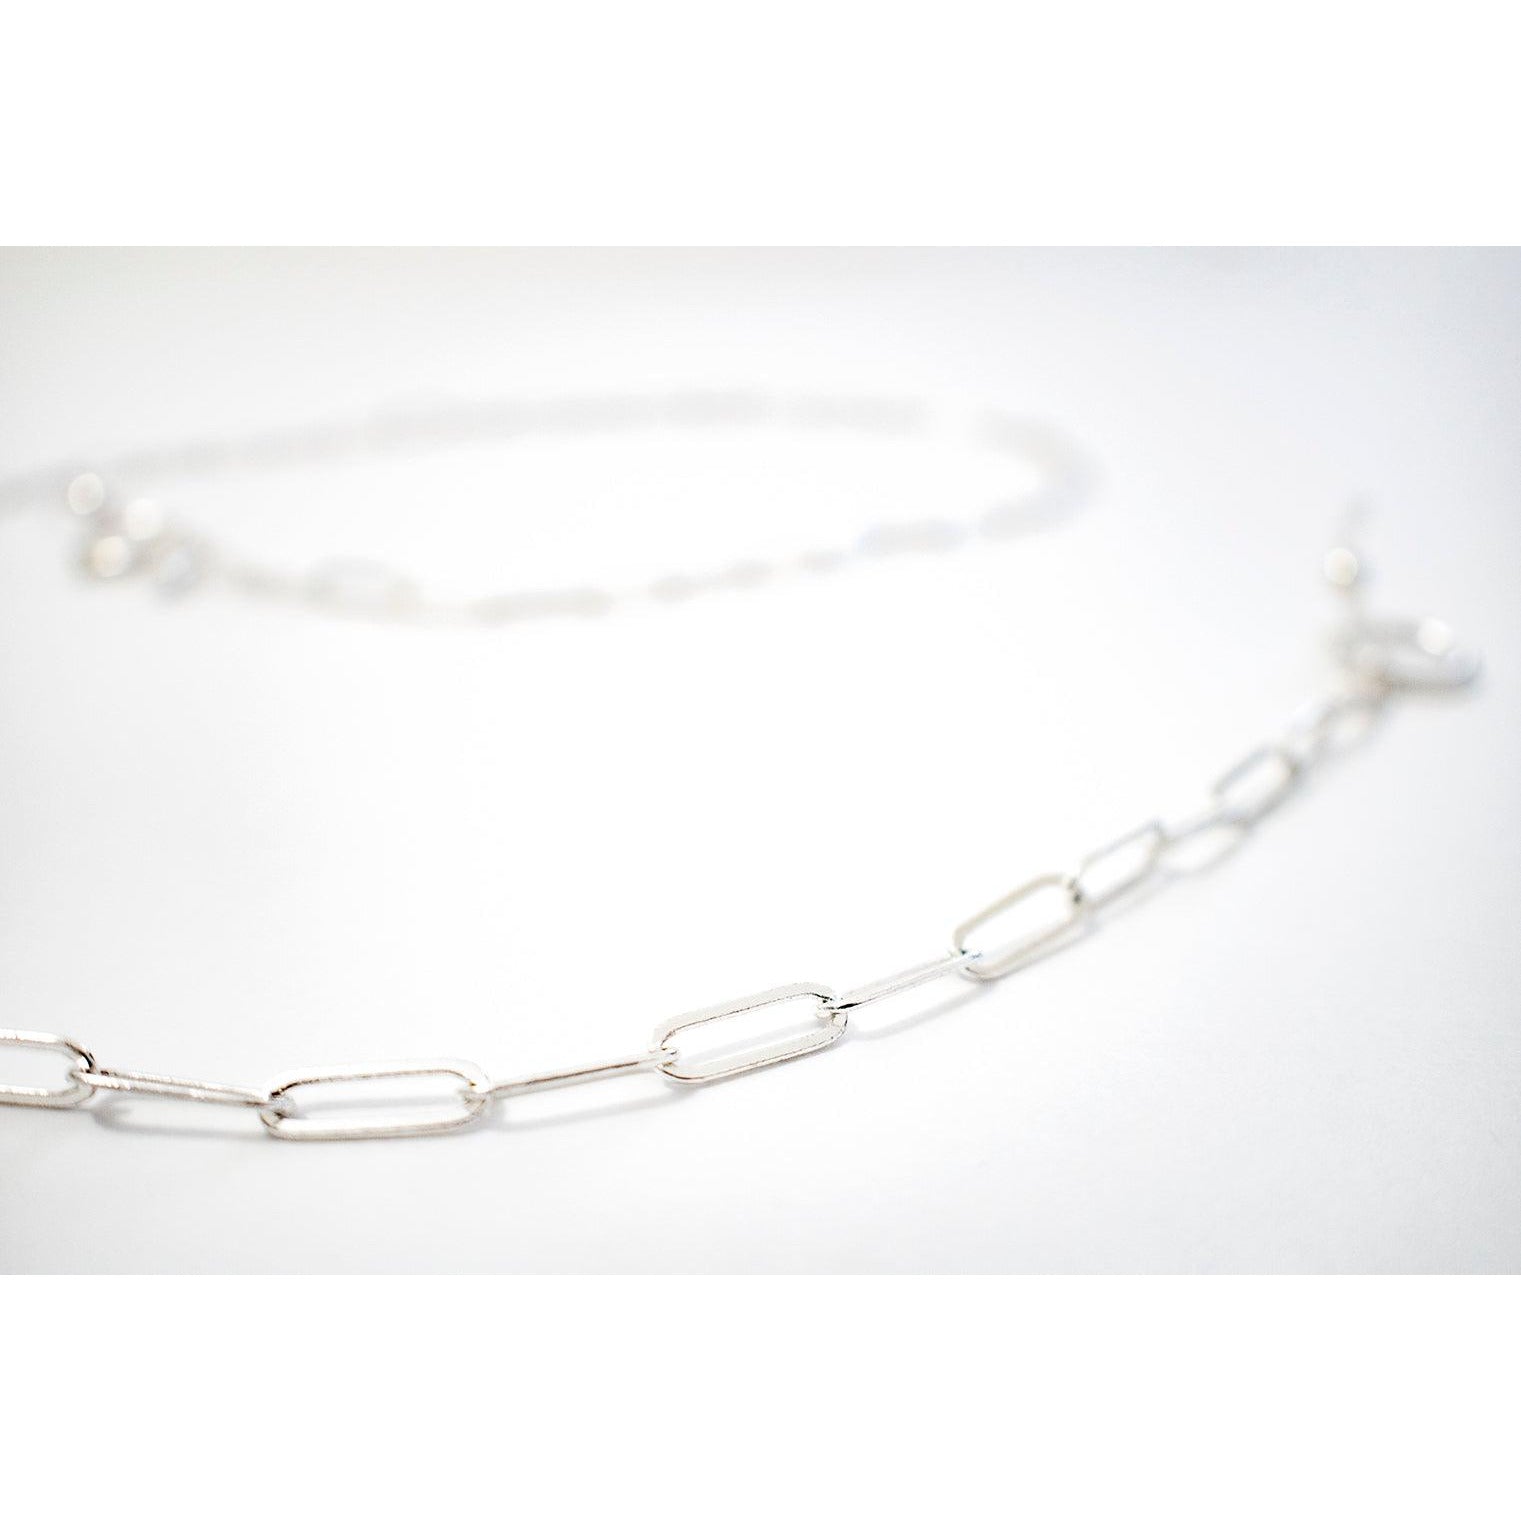 Large Link Nostalgia Silver Chain from Vint & York